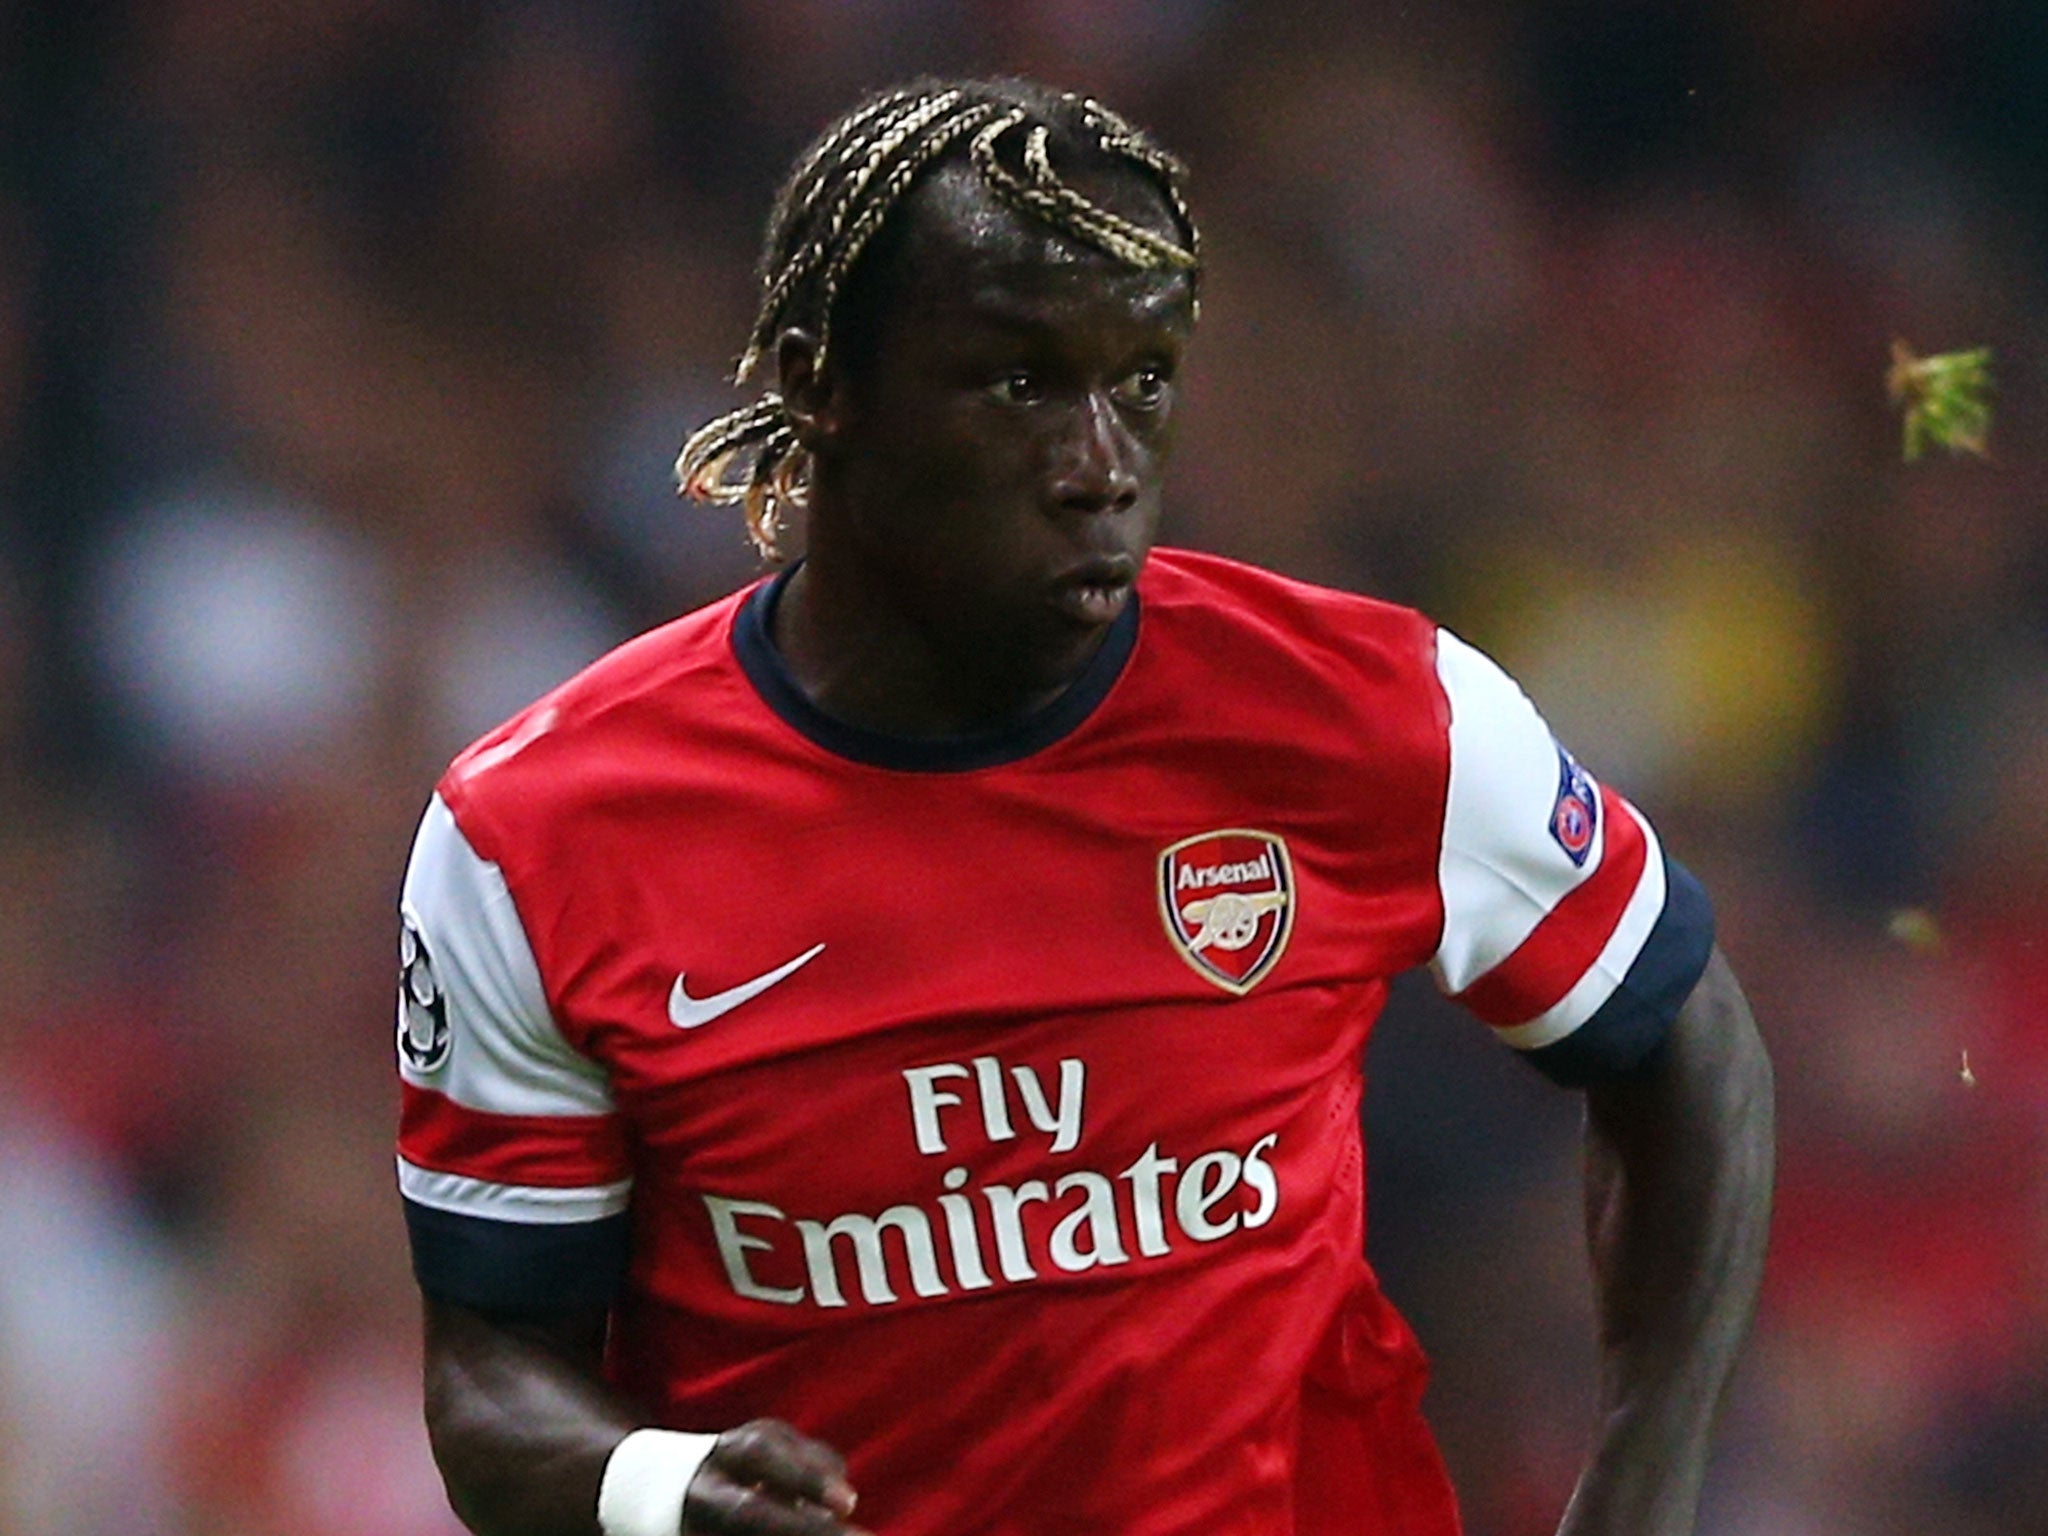 Bacary Sagna's Arsenal contract runs out at the end of the season